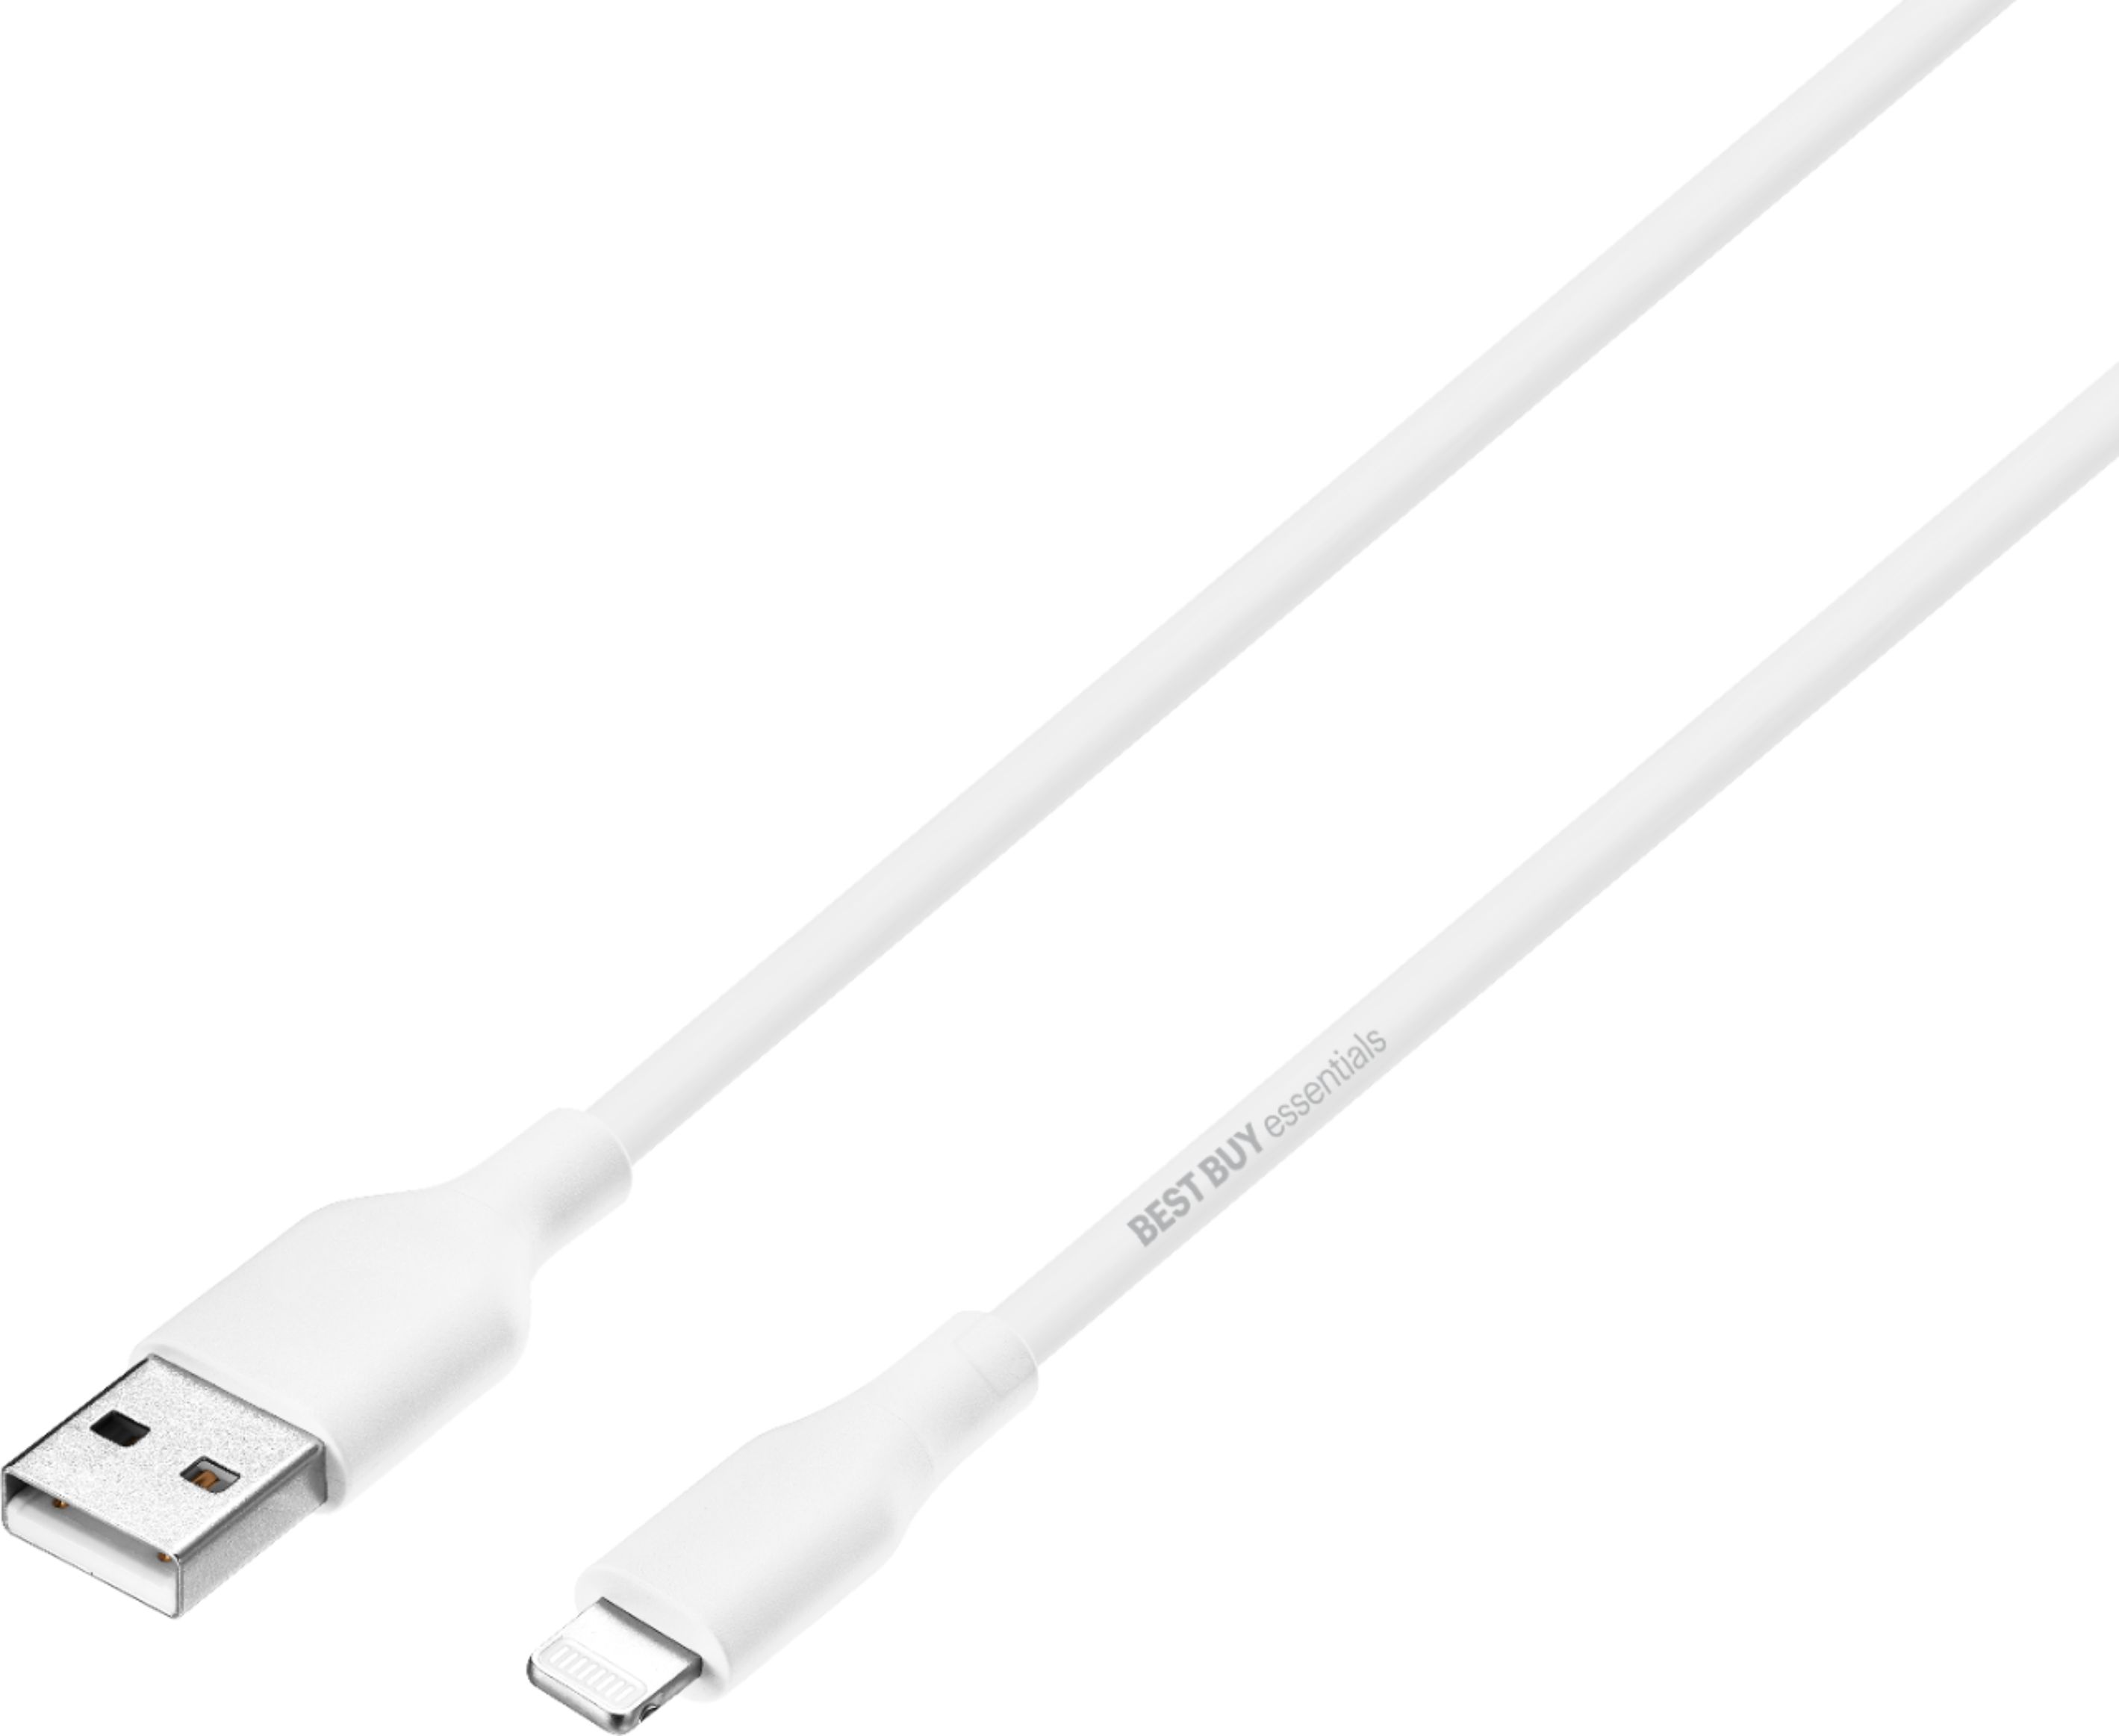 Best Buy essentials™ 5' Lightning to USB Cable White BE-MLA522W - Best Buy